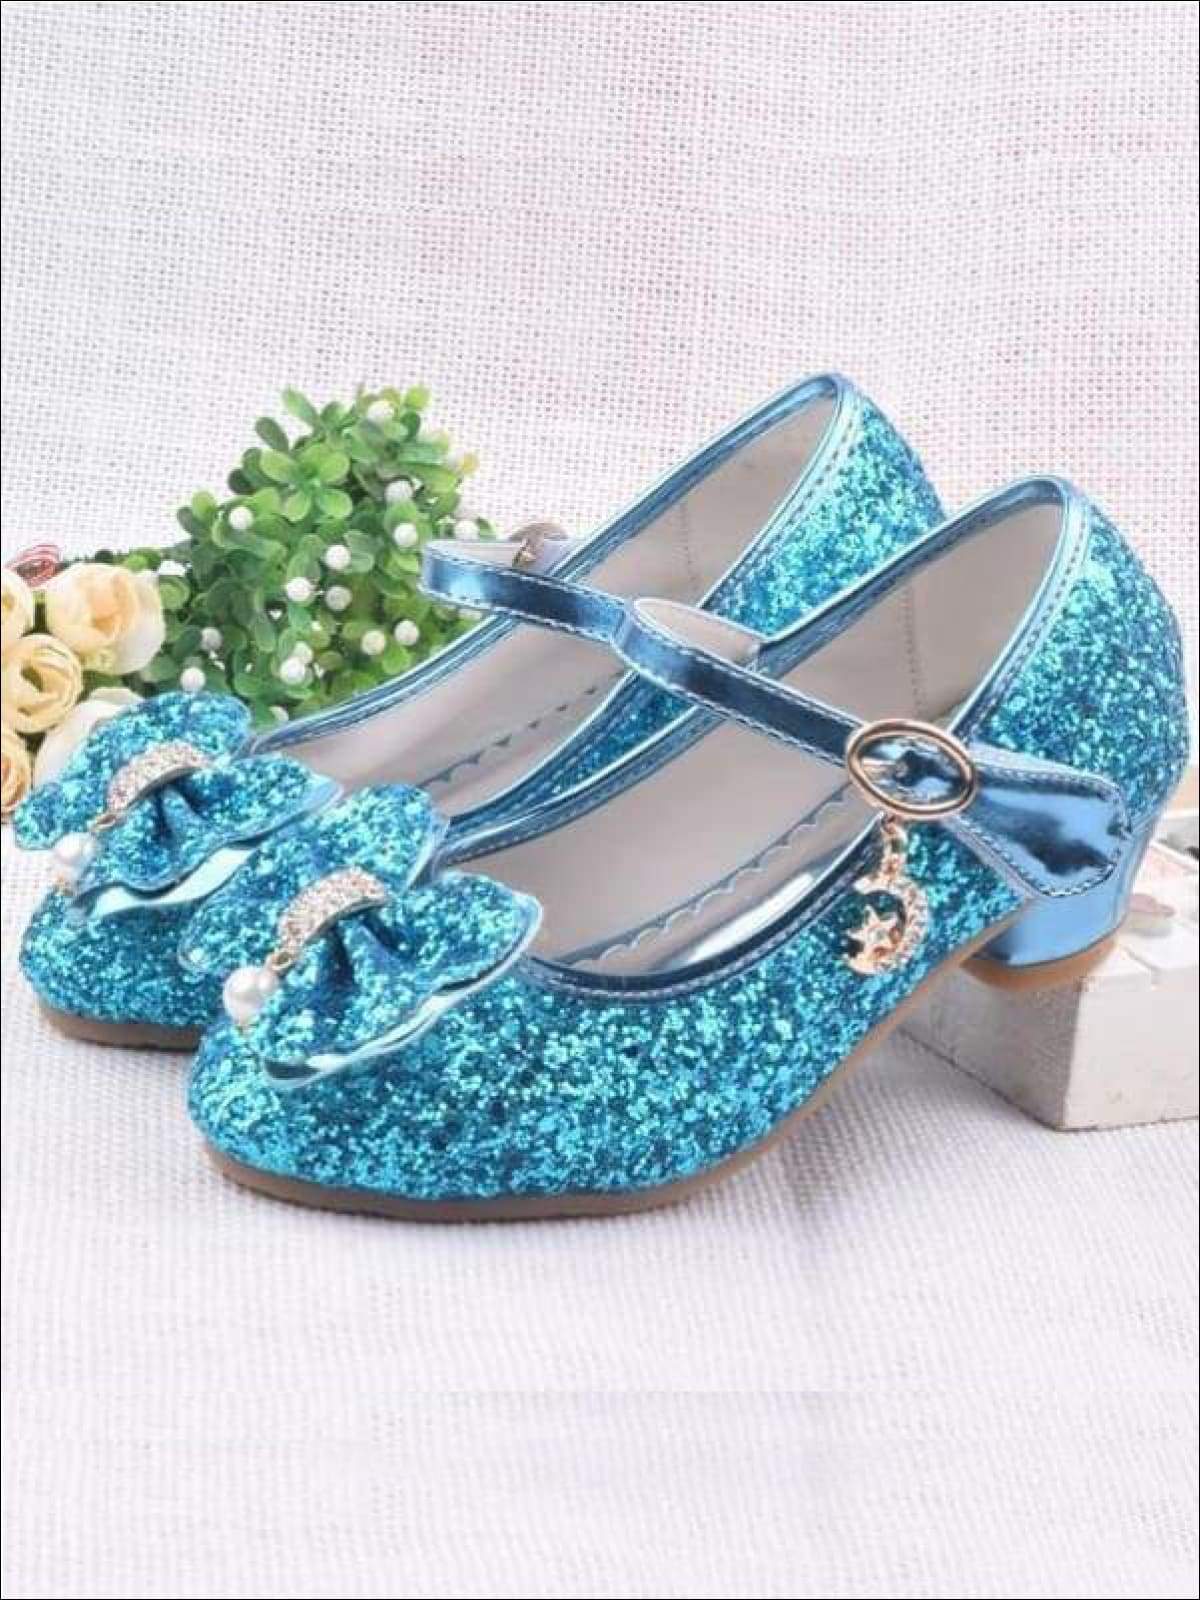 Girls Pearl Embellished Bow Tie Mary Jane Glitter Princess Shoes - Girls Flats